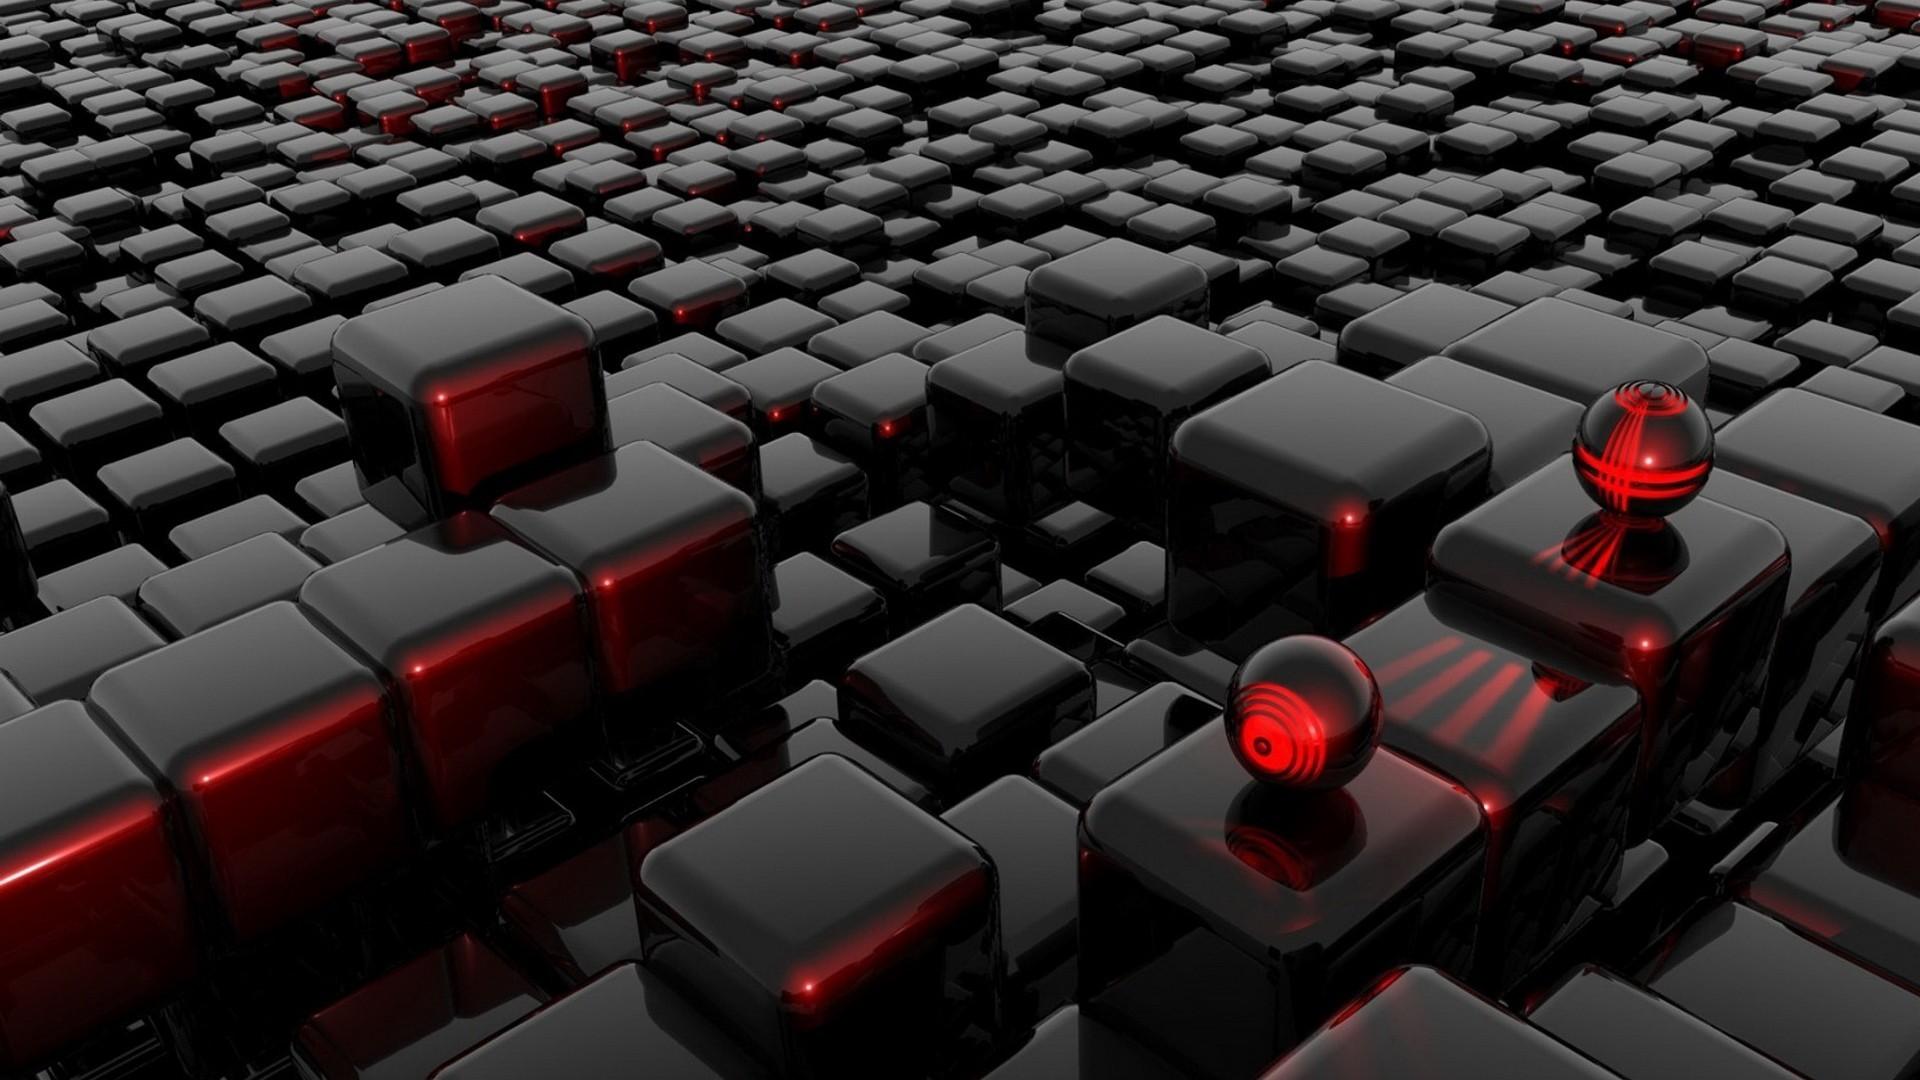 3d Wallpaper Black And Red Image Num 25